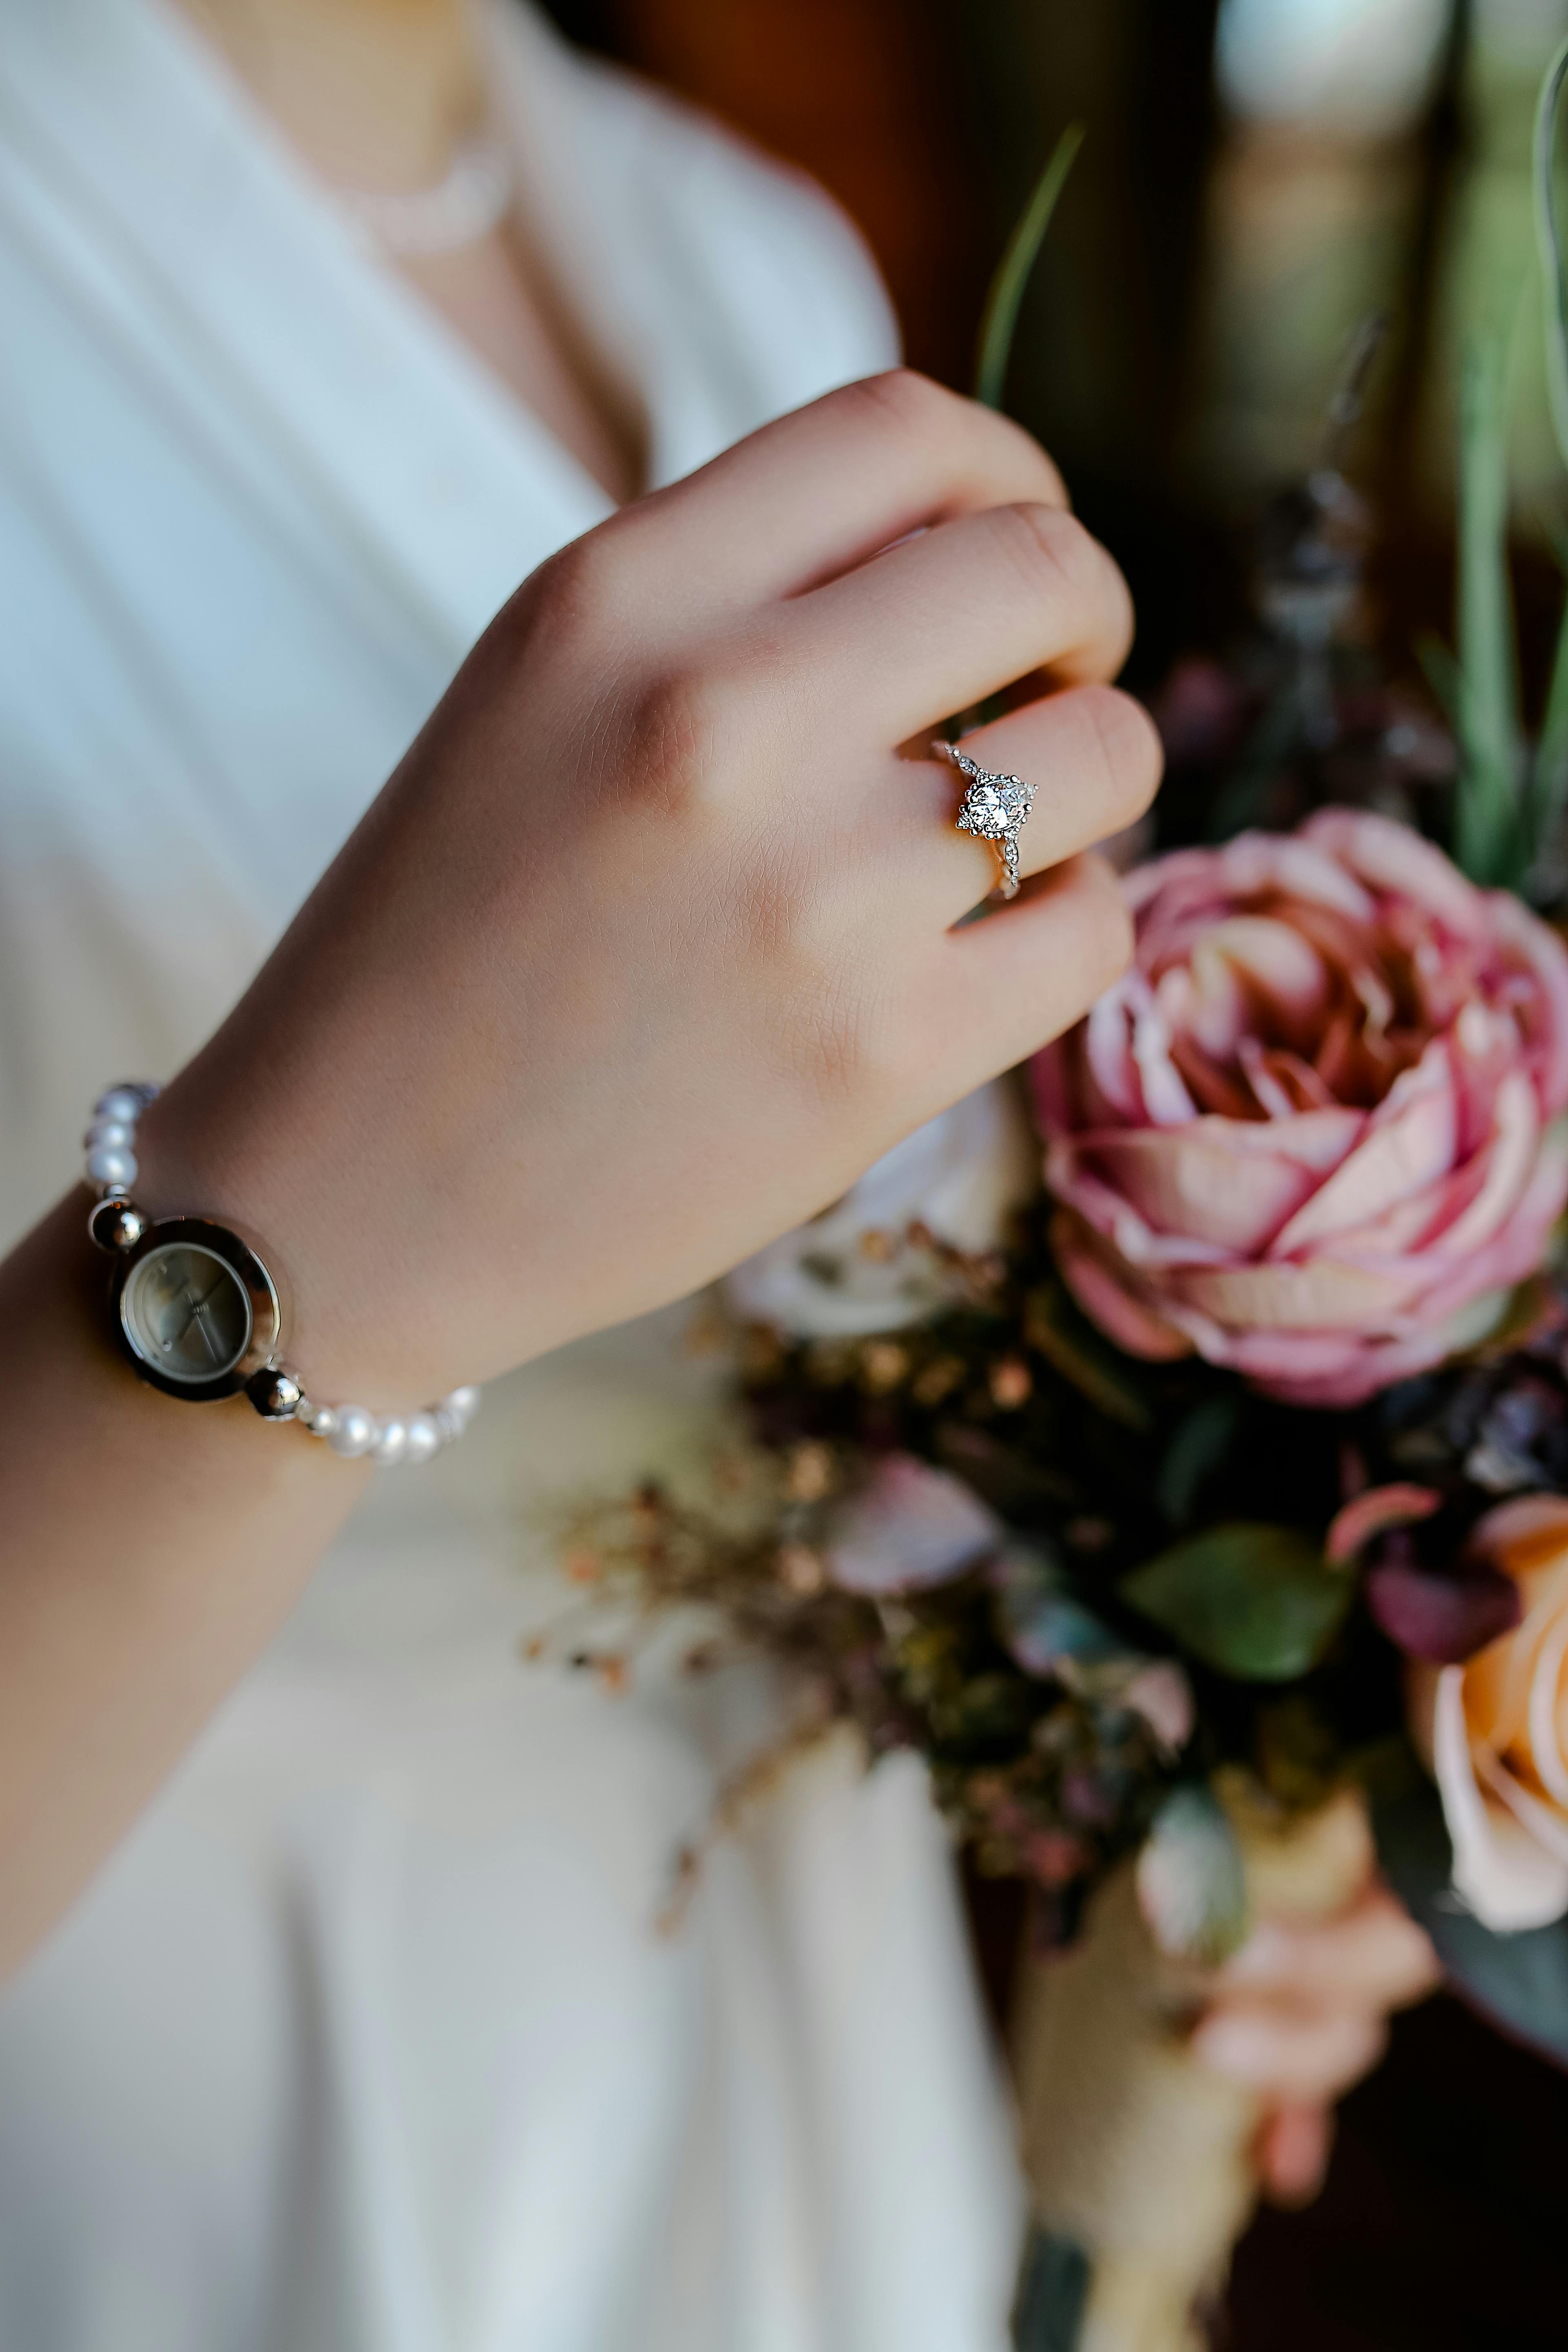 A woman holding a bouquet and wearing a diamond ring | Source: Pexels